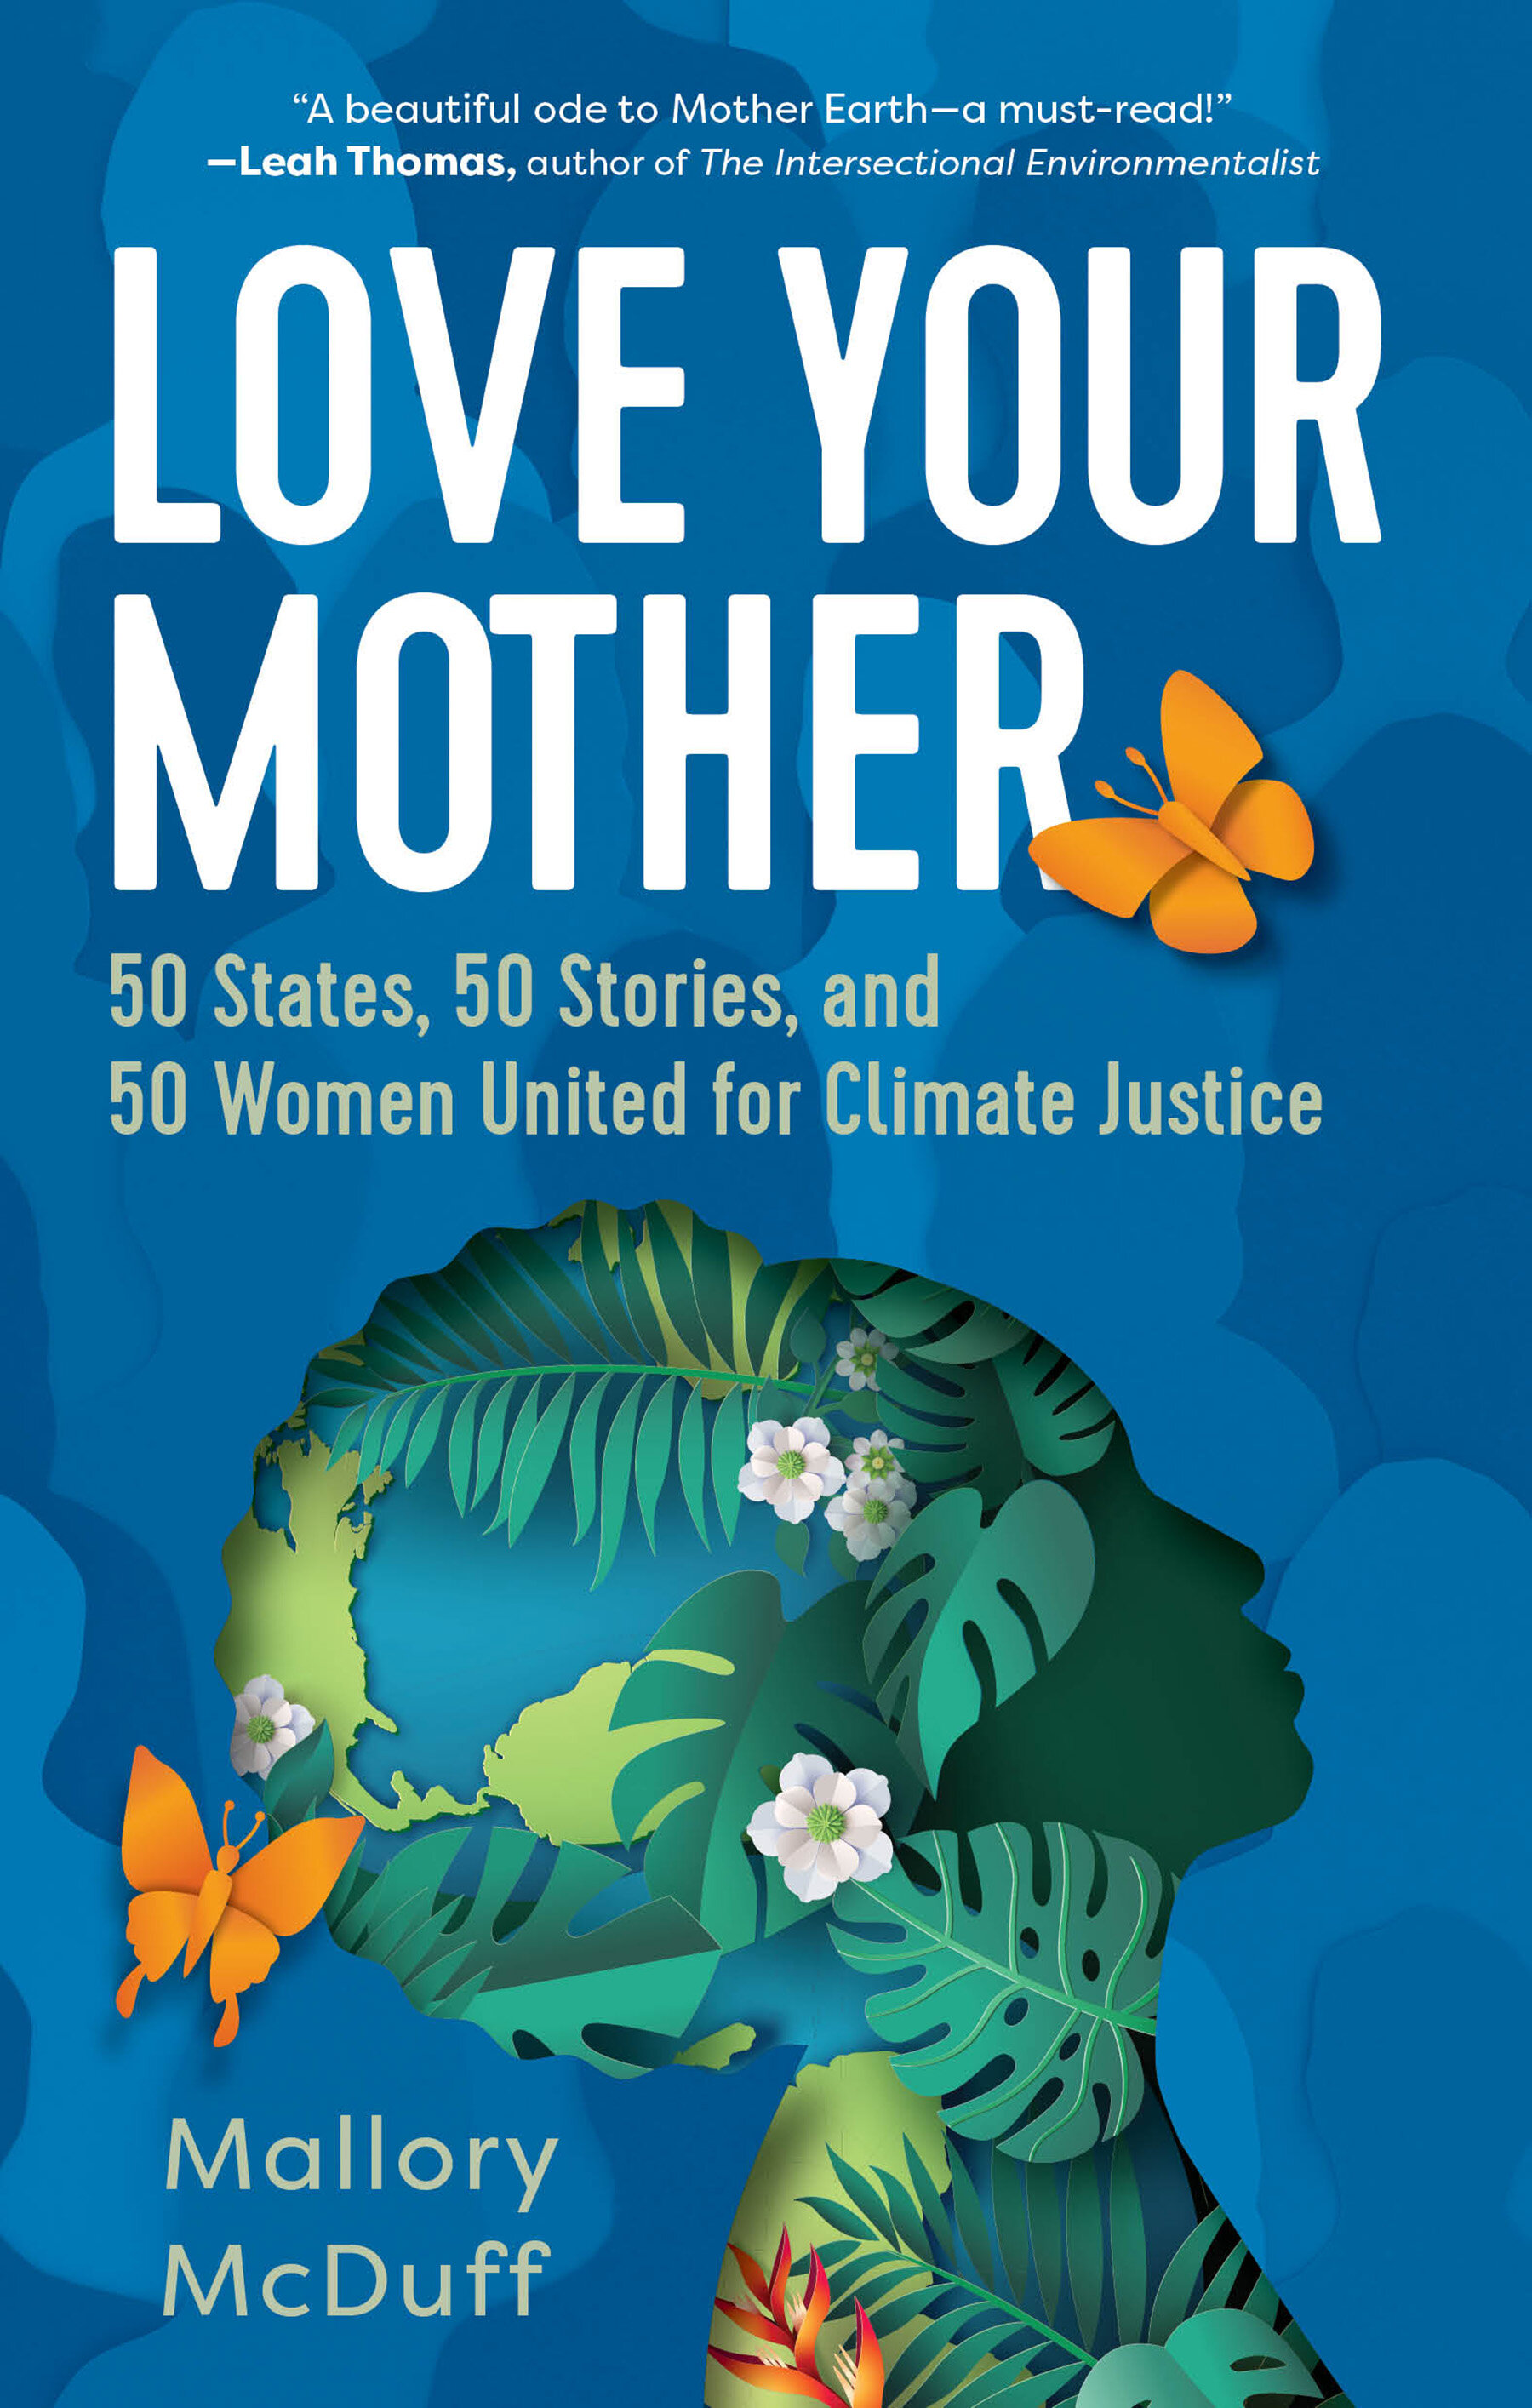 Love Your Mother: 50 States, 50 Stories, and 50 Women United for Climate Justice